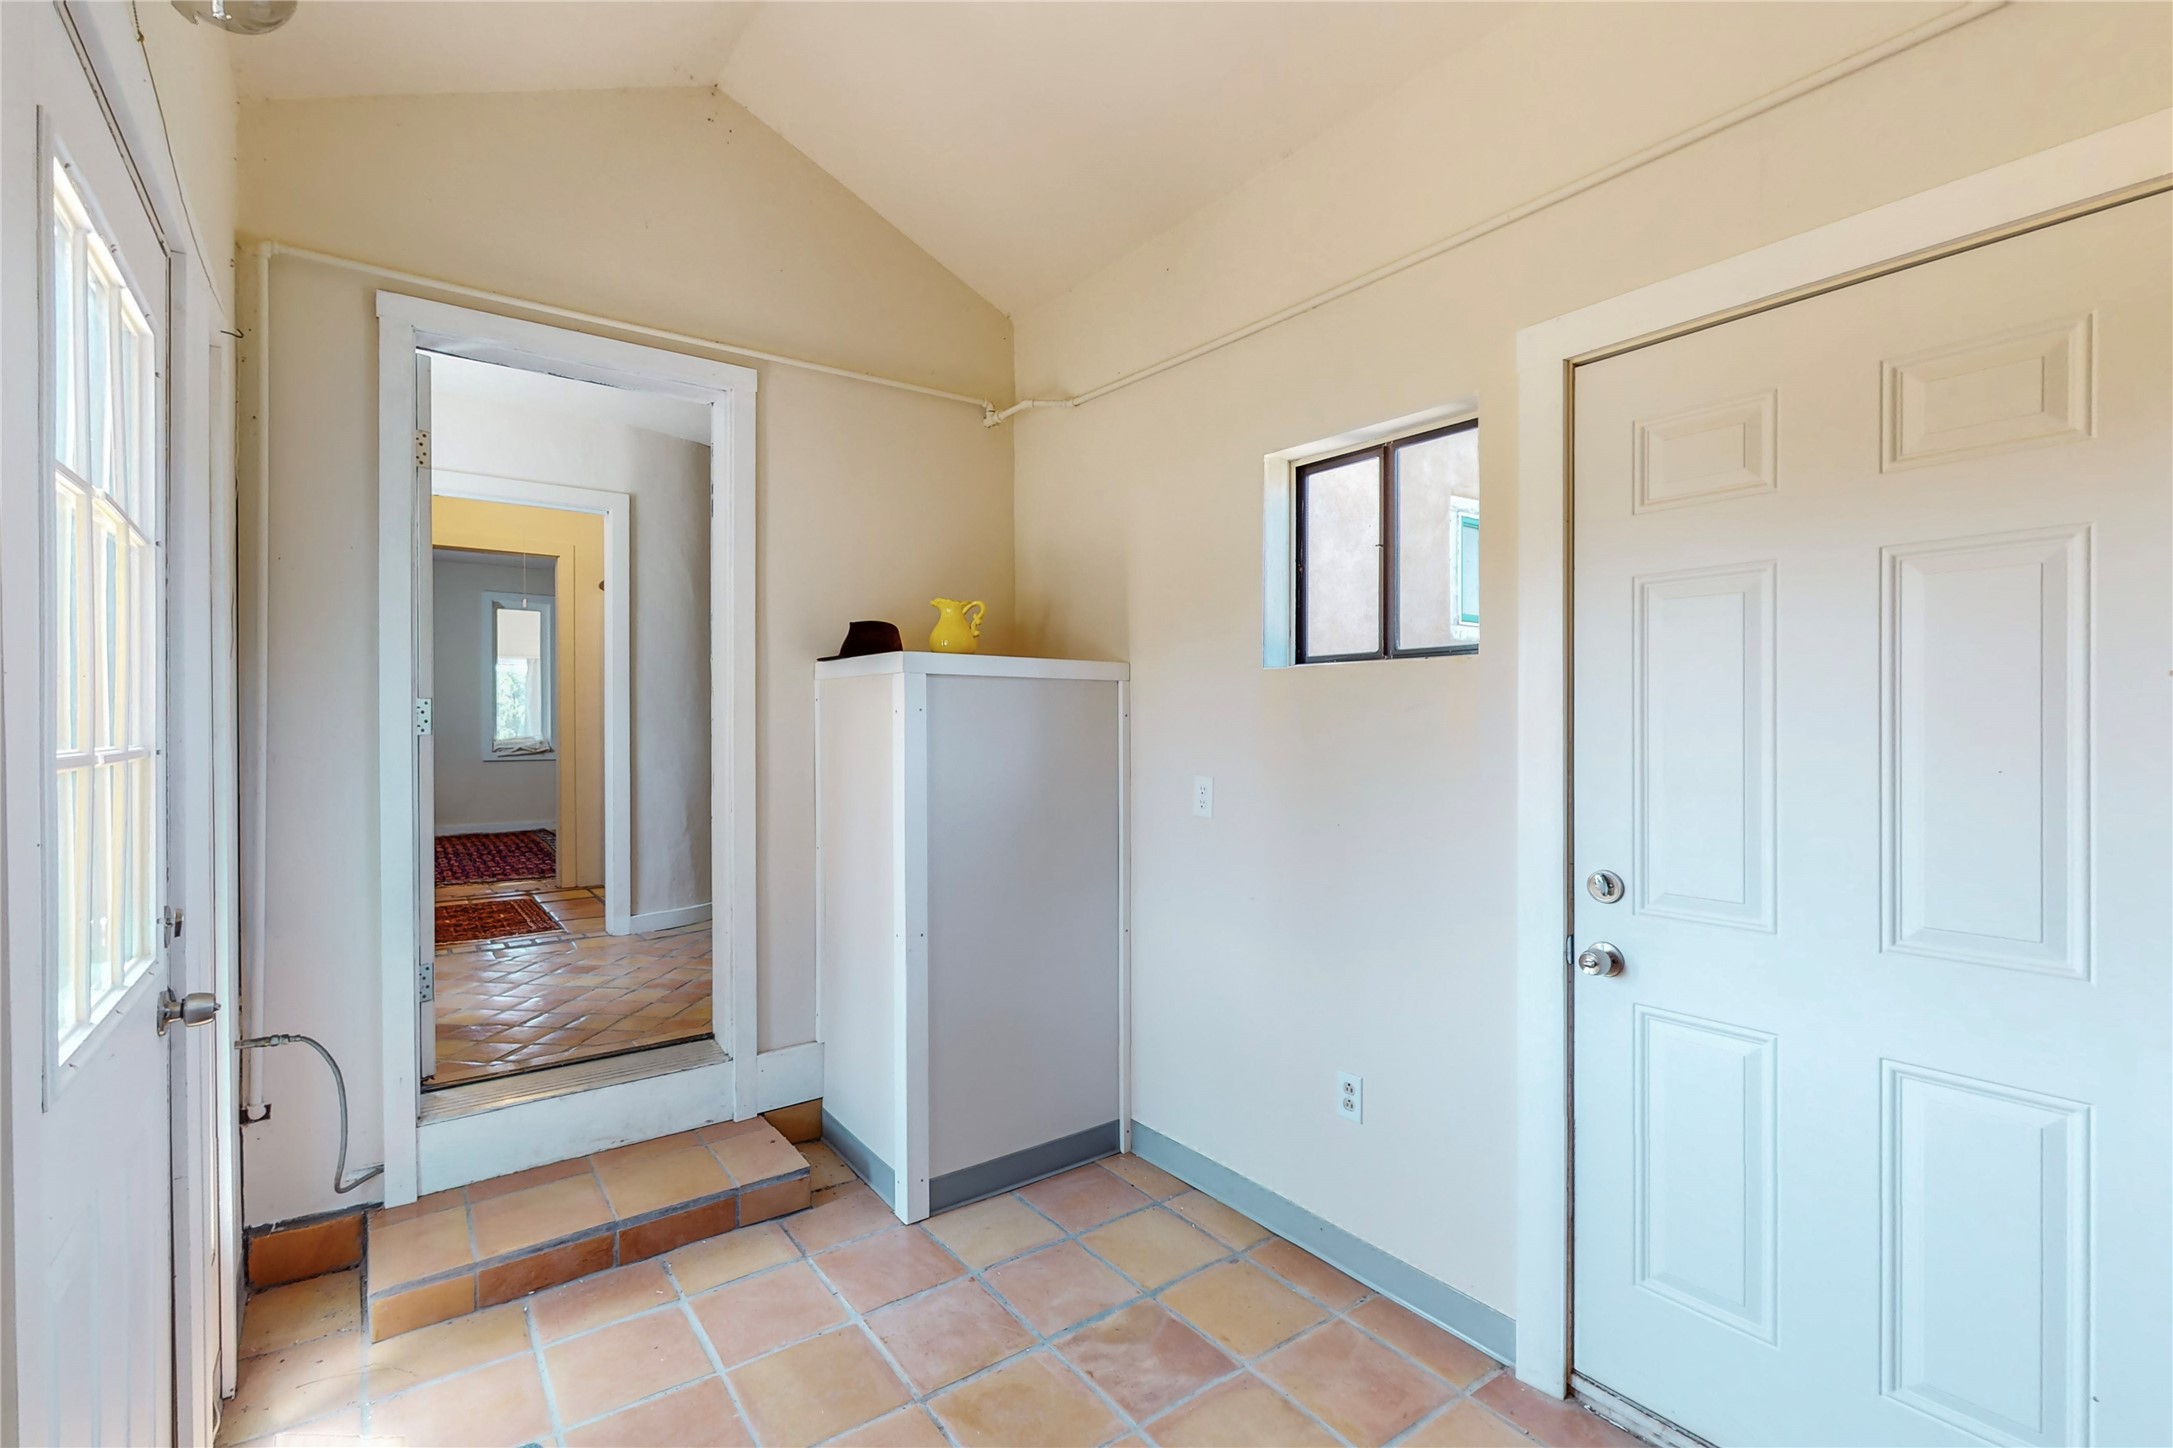 Entry, mudroom, covered hot water heater